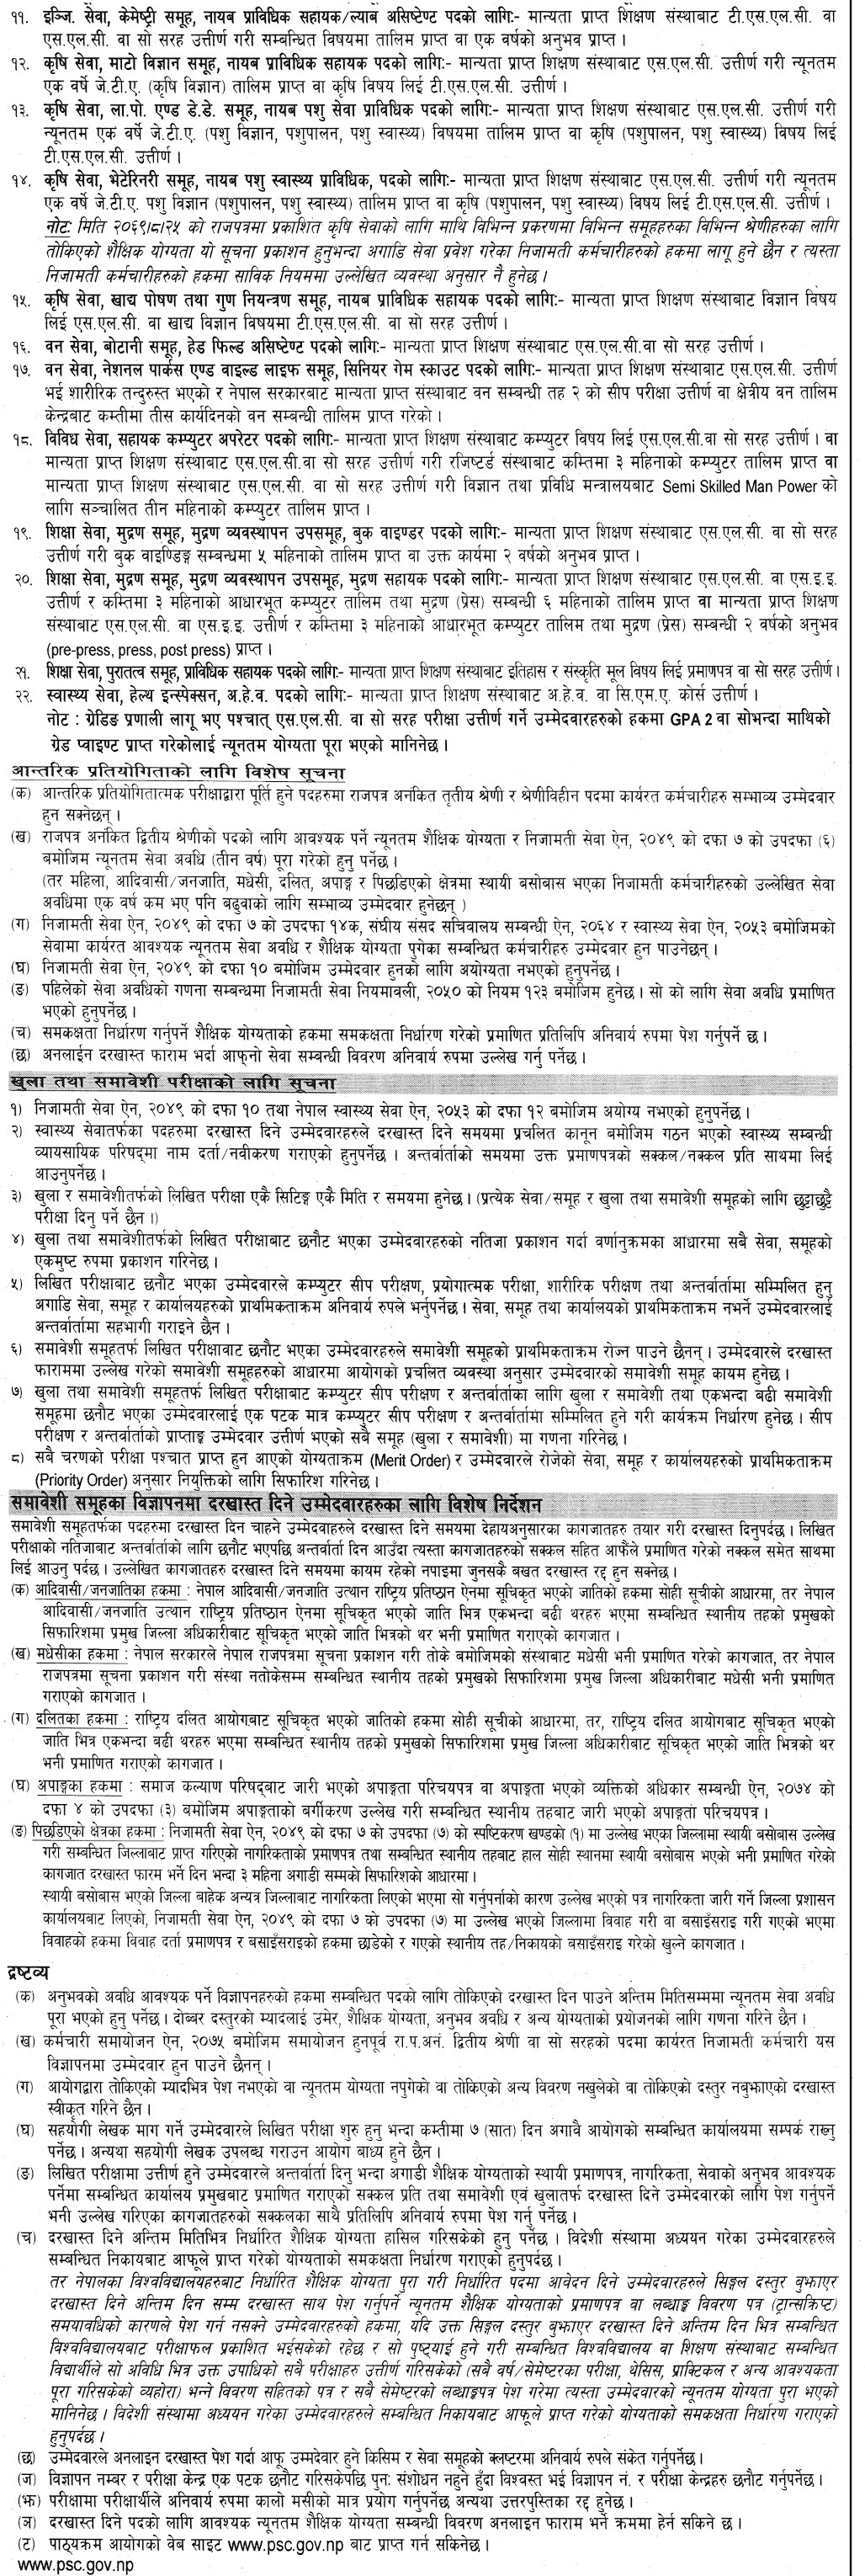 Vacancies For Non Gazetted Second Class Technical And Health Level 4